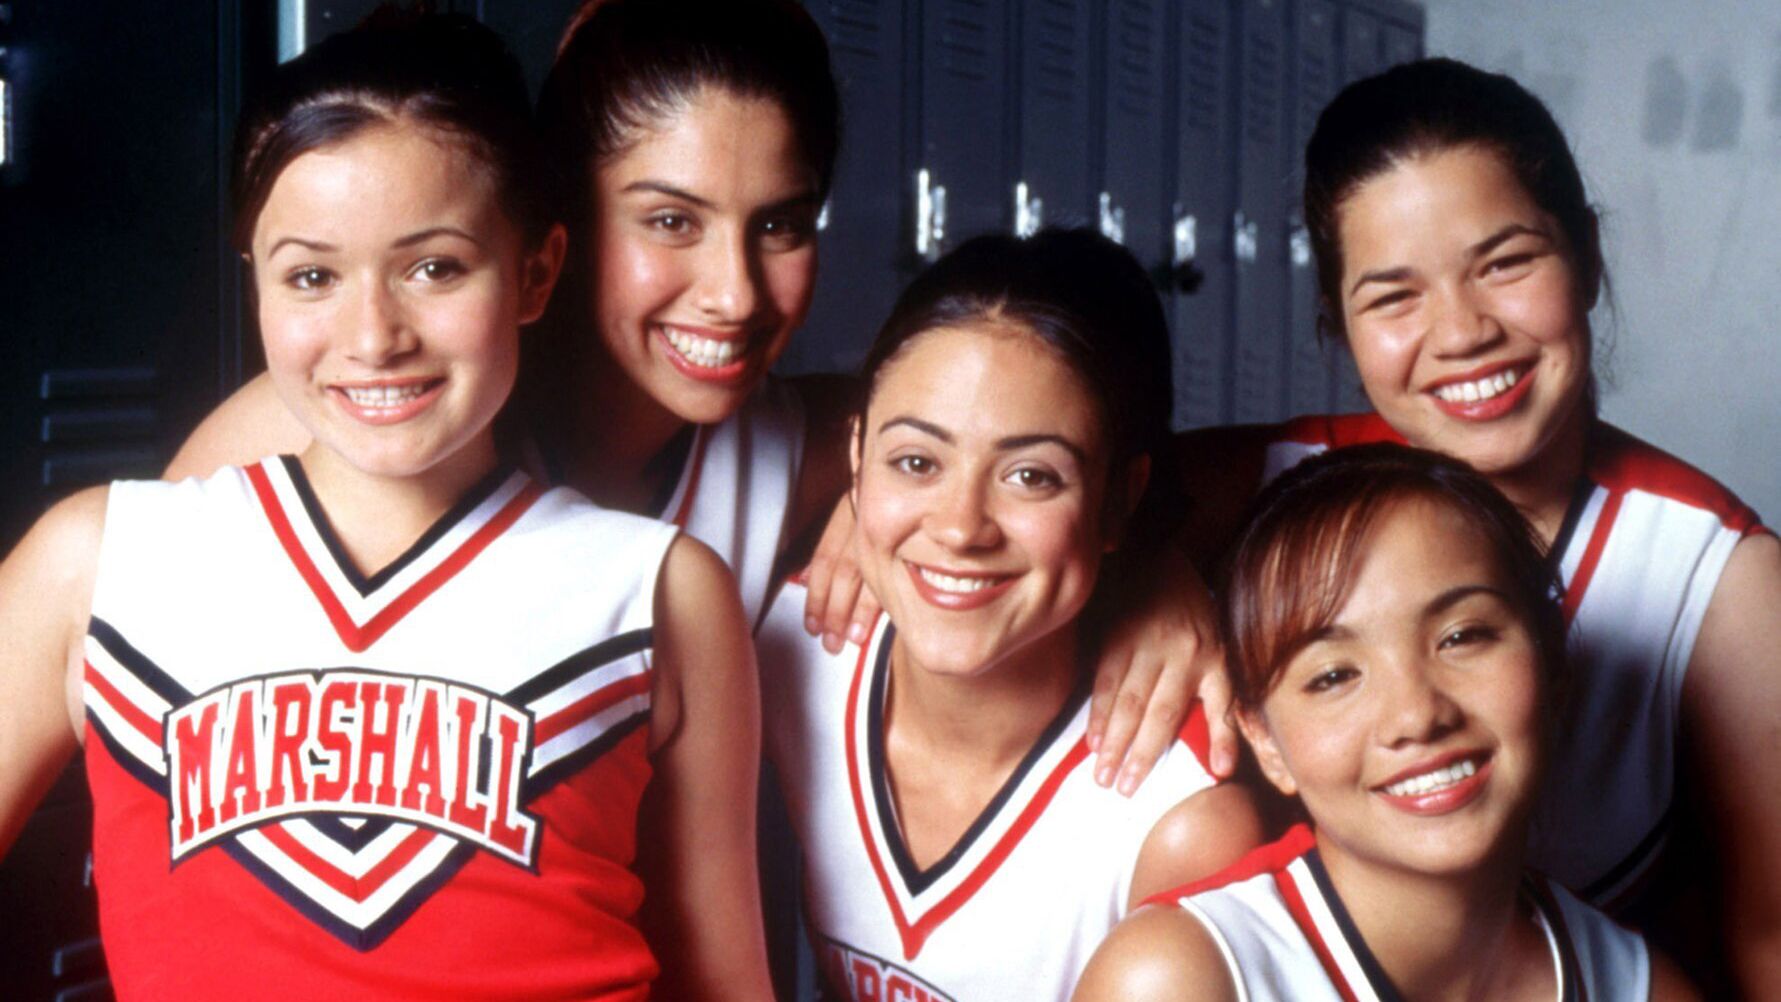 15 Best Cheerleader Movies And Tv Shows 2023 - Cheer Films And Series